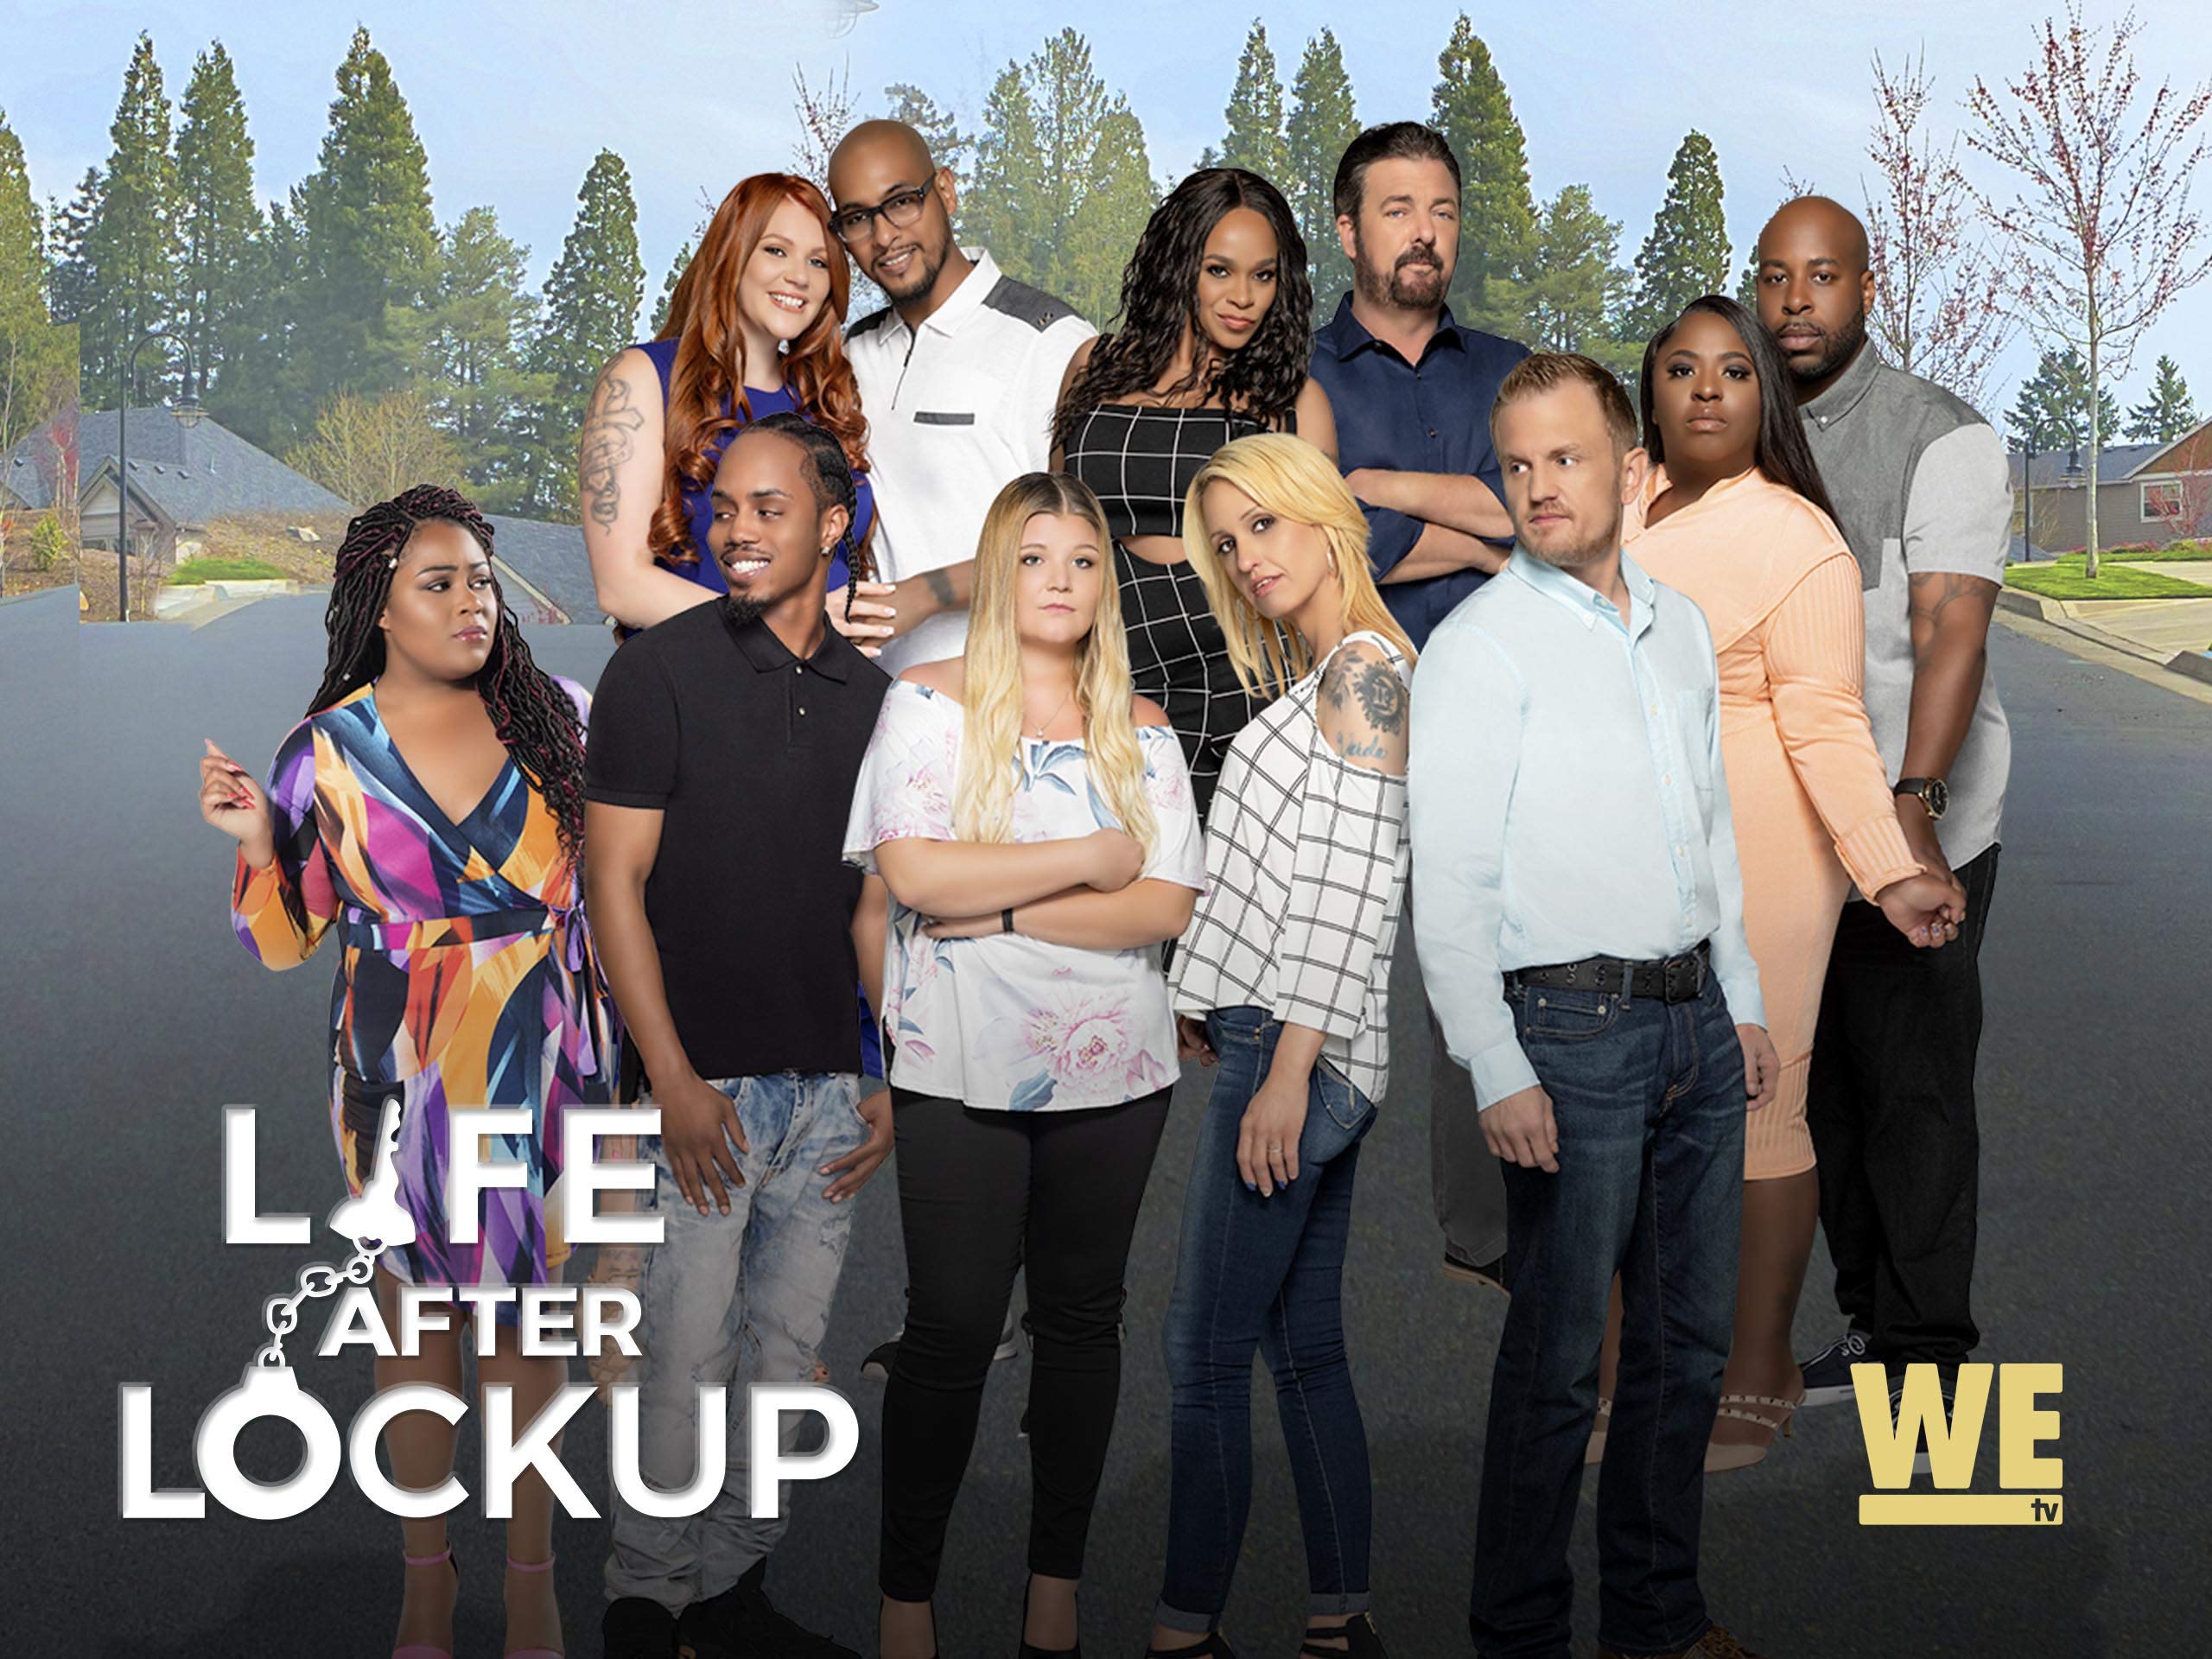 Life after lockup premiere date